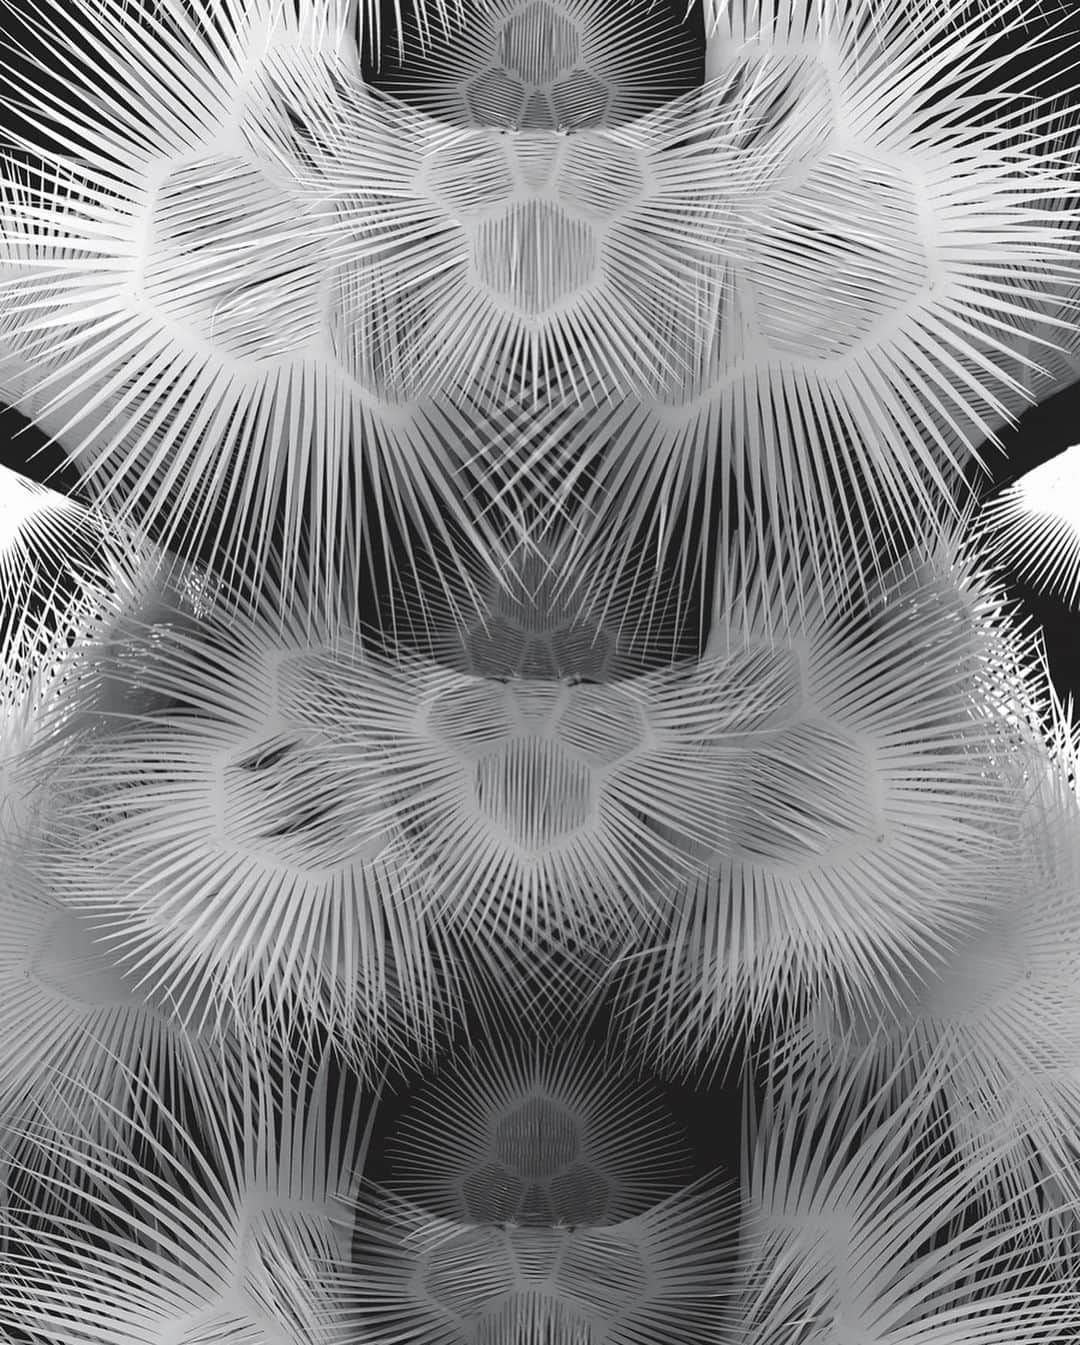 Iris Van Herpeさんのインスタグラム写真 - (Iris Van HerpeInstagram)「Our first collaboration with visionary architect Philip Beesley was for our ‘Voltage’ collection back in 2013. Since the debut of Voltage Iris van Herpen and Philip Beesley have been collaborating on numerous transcending material innovations. We here illuminate a selection of our treasured ongoing collaboration. "I remember that in our very first exchanges Iris and I spoke of things at the far edges of perception ~ of floating and diving and of radiant halos. Our ongoing work together lives on those edges. The insight I've gained from our shared work has transformed how I approach my own craft. Perhaps this comes because Iris approaches Couture as intimate architecture, expanding the boundaries of skin and clothing into rippling, efflorescing octaves of space that reach outward, upward and downward without limit.“ Philip Beesley  Video 1: ‘Lucid' dress in movement, 2016  Image 2: Atelier process photo of the ‘Lucid’ dress, 2016 Video 3: ‘Galactic glitch’ dress in movement, 2019 Image 4: ‘Magnetic Motion’ dress, Mathieu Cecar, 2015 Video 5: ‘Lucid’ shoulder dress in movement, 2019 Image 6: ‘Aeriform’ dress, 2017 Video 7: ‘Glitch’ dress in process inside the atelier, 2017 Image 8: ‘Voltage’ dress in movement, 2013 Image 9: ‘Voltage’ dress, detail photo, Bart Oomes, 2013 Image 10: ‘Omniverse’ dress, Julien Vallon, 2019  #irisvanherpen #philipbeesley」12月19日 22時02分 - irisvanherpen